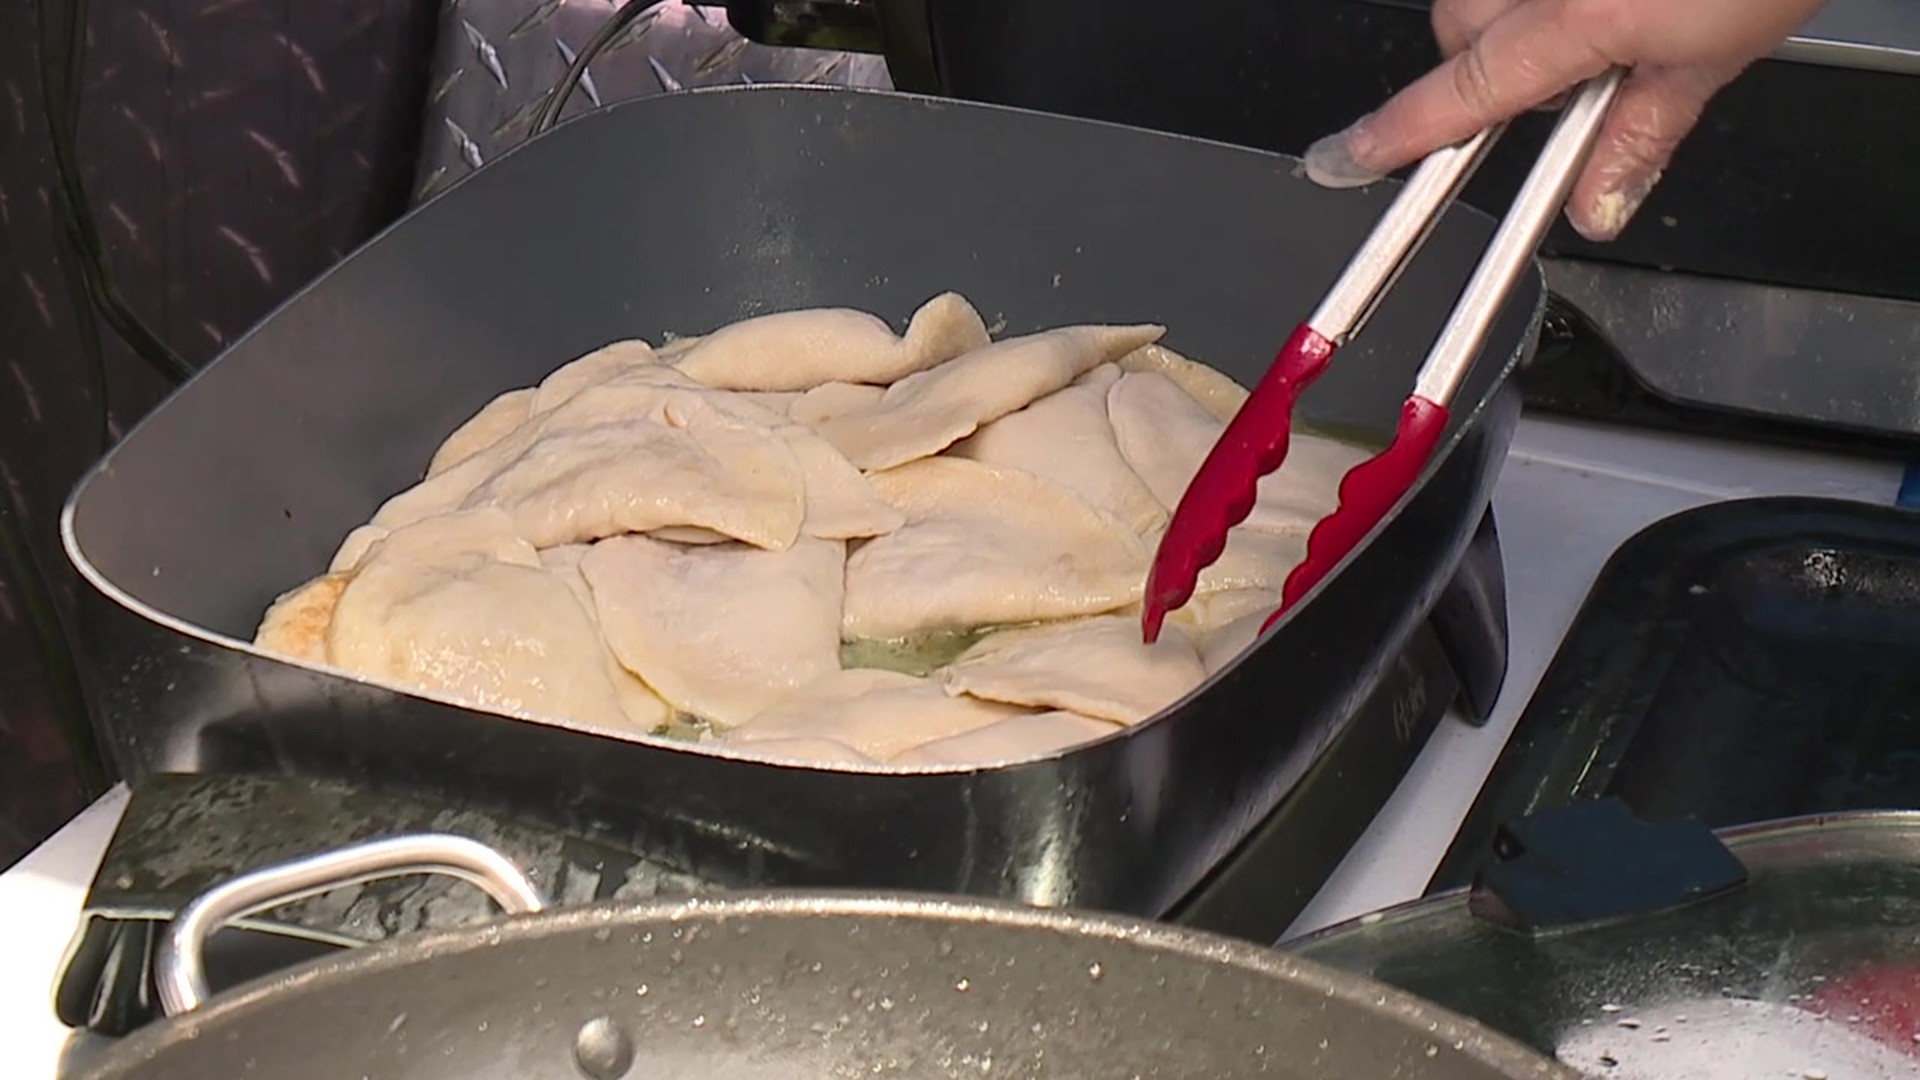 It's all about classic Polish food this weekend in Luzerne County.